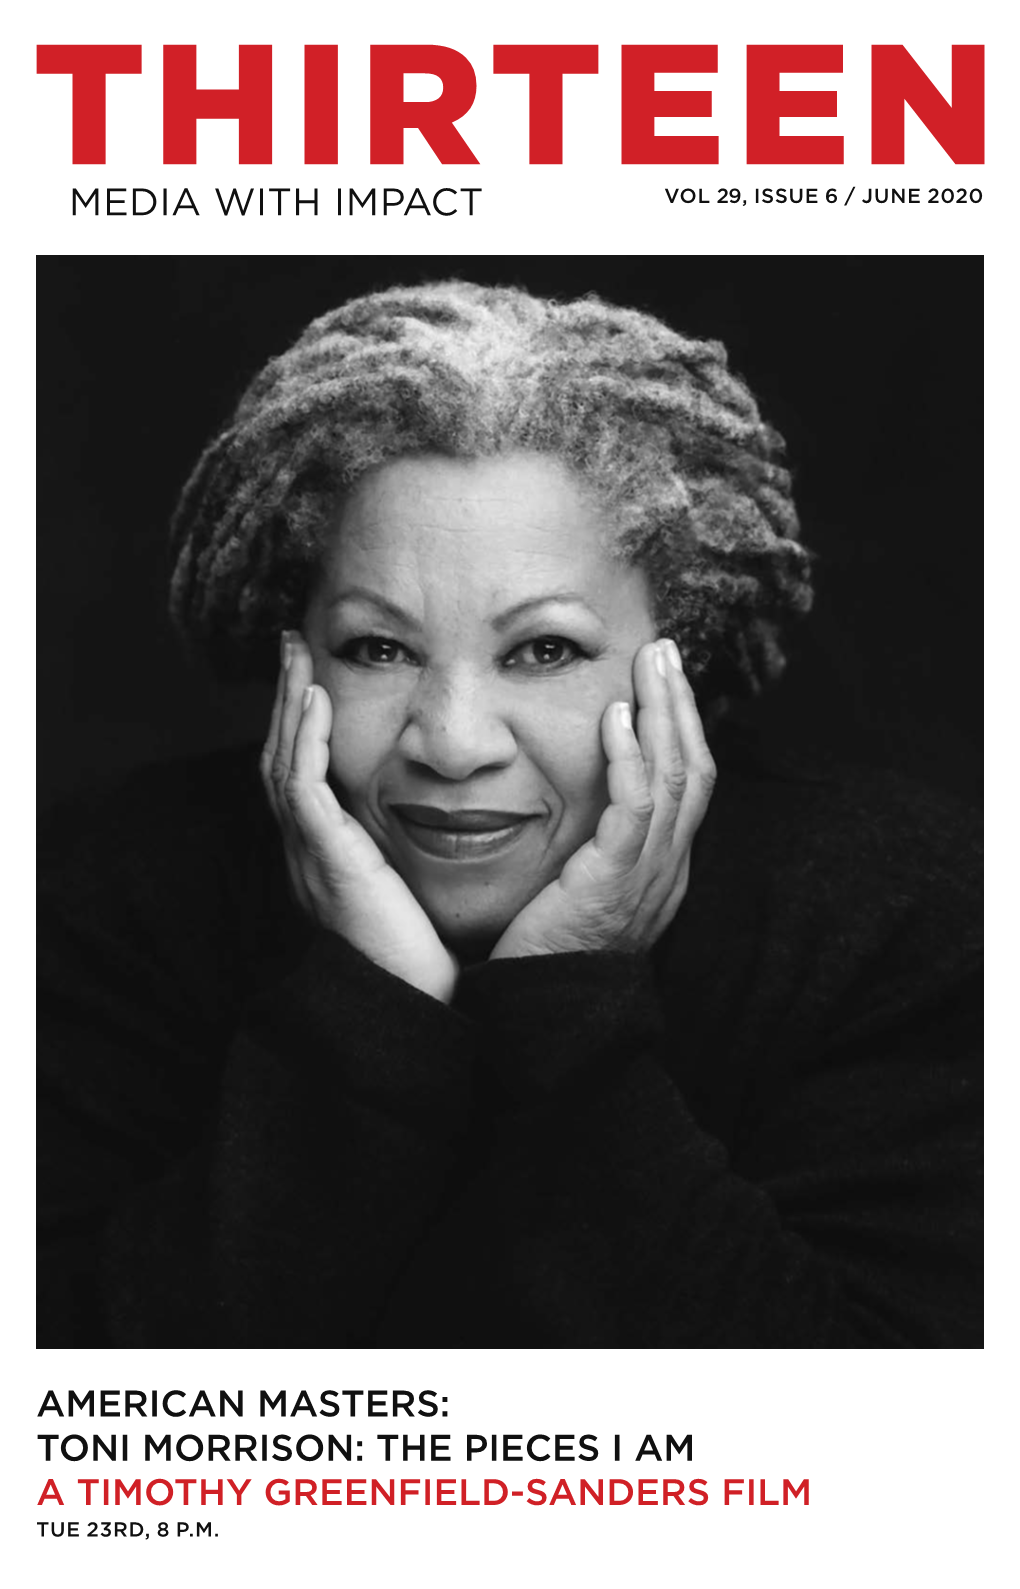 Toni Morrison: the Pieces I Am a Timothy Greenfield-Sanders Film Tue 23Rd, 8 P.M